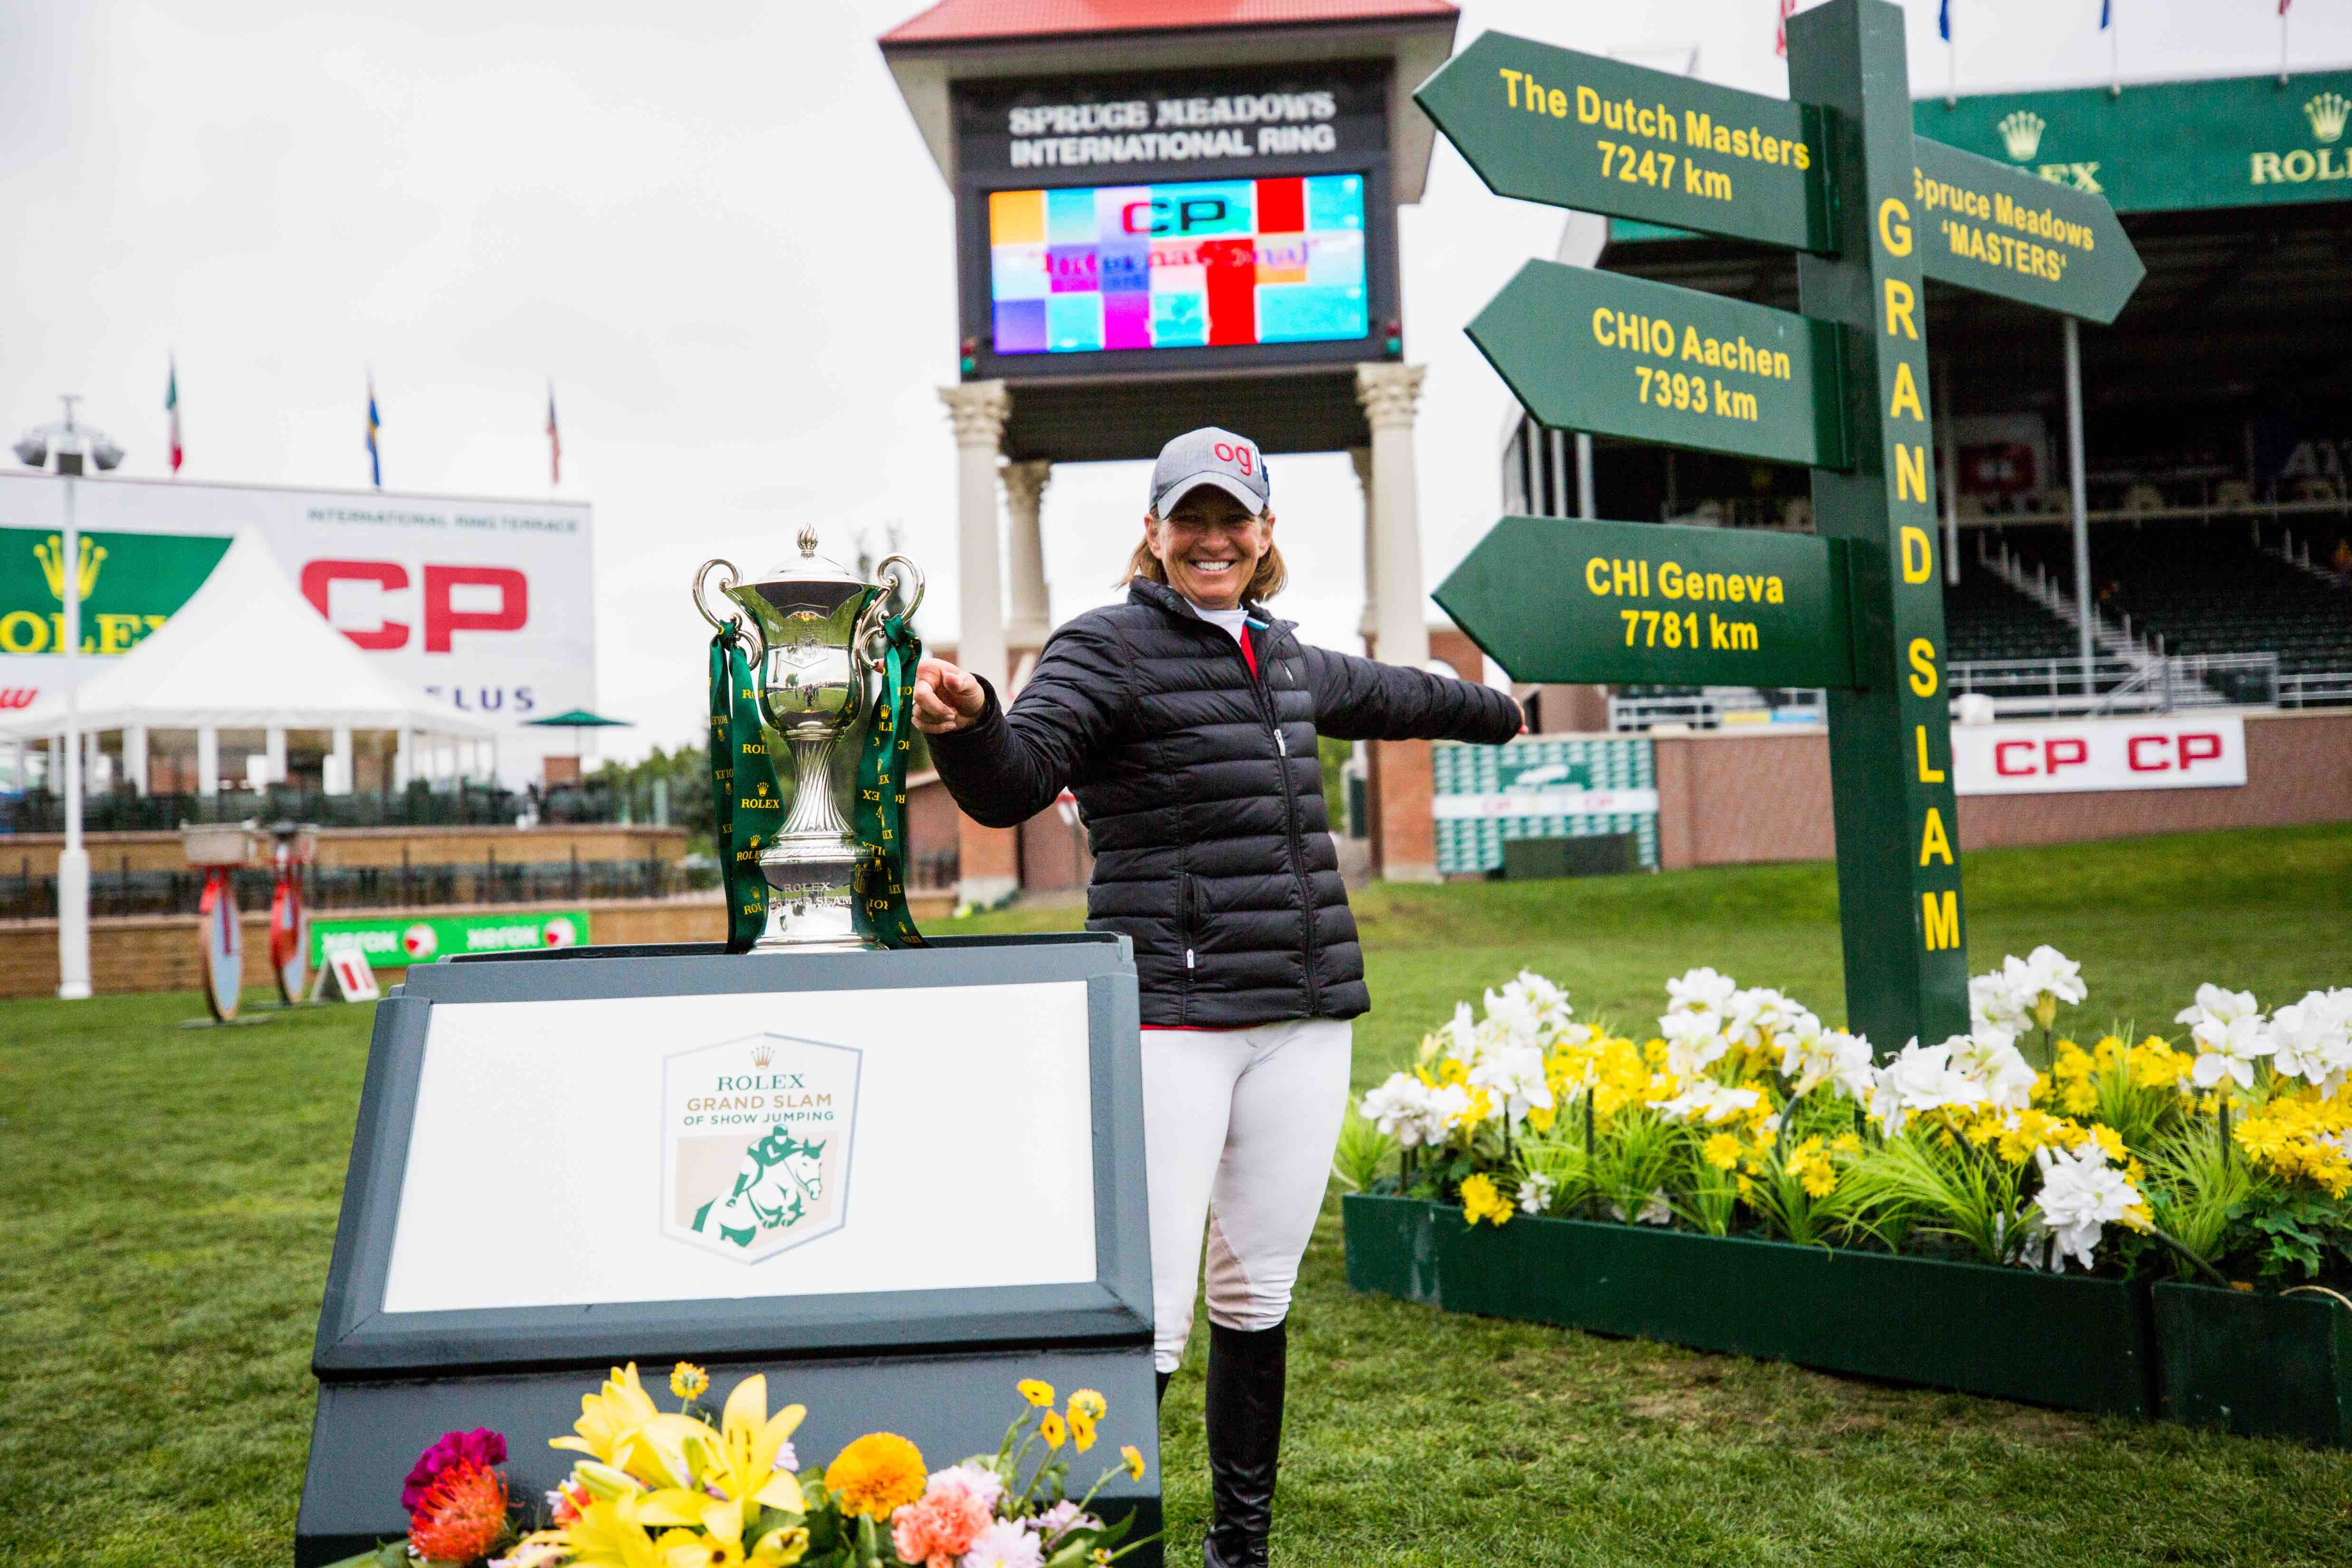 Exclusive interview with Rolex Grand Slam live contender Beezie Madden